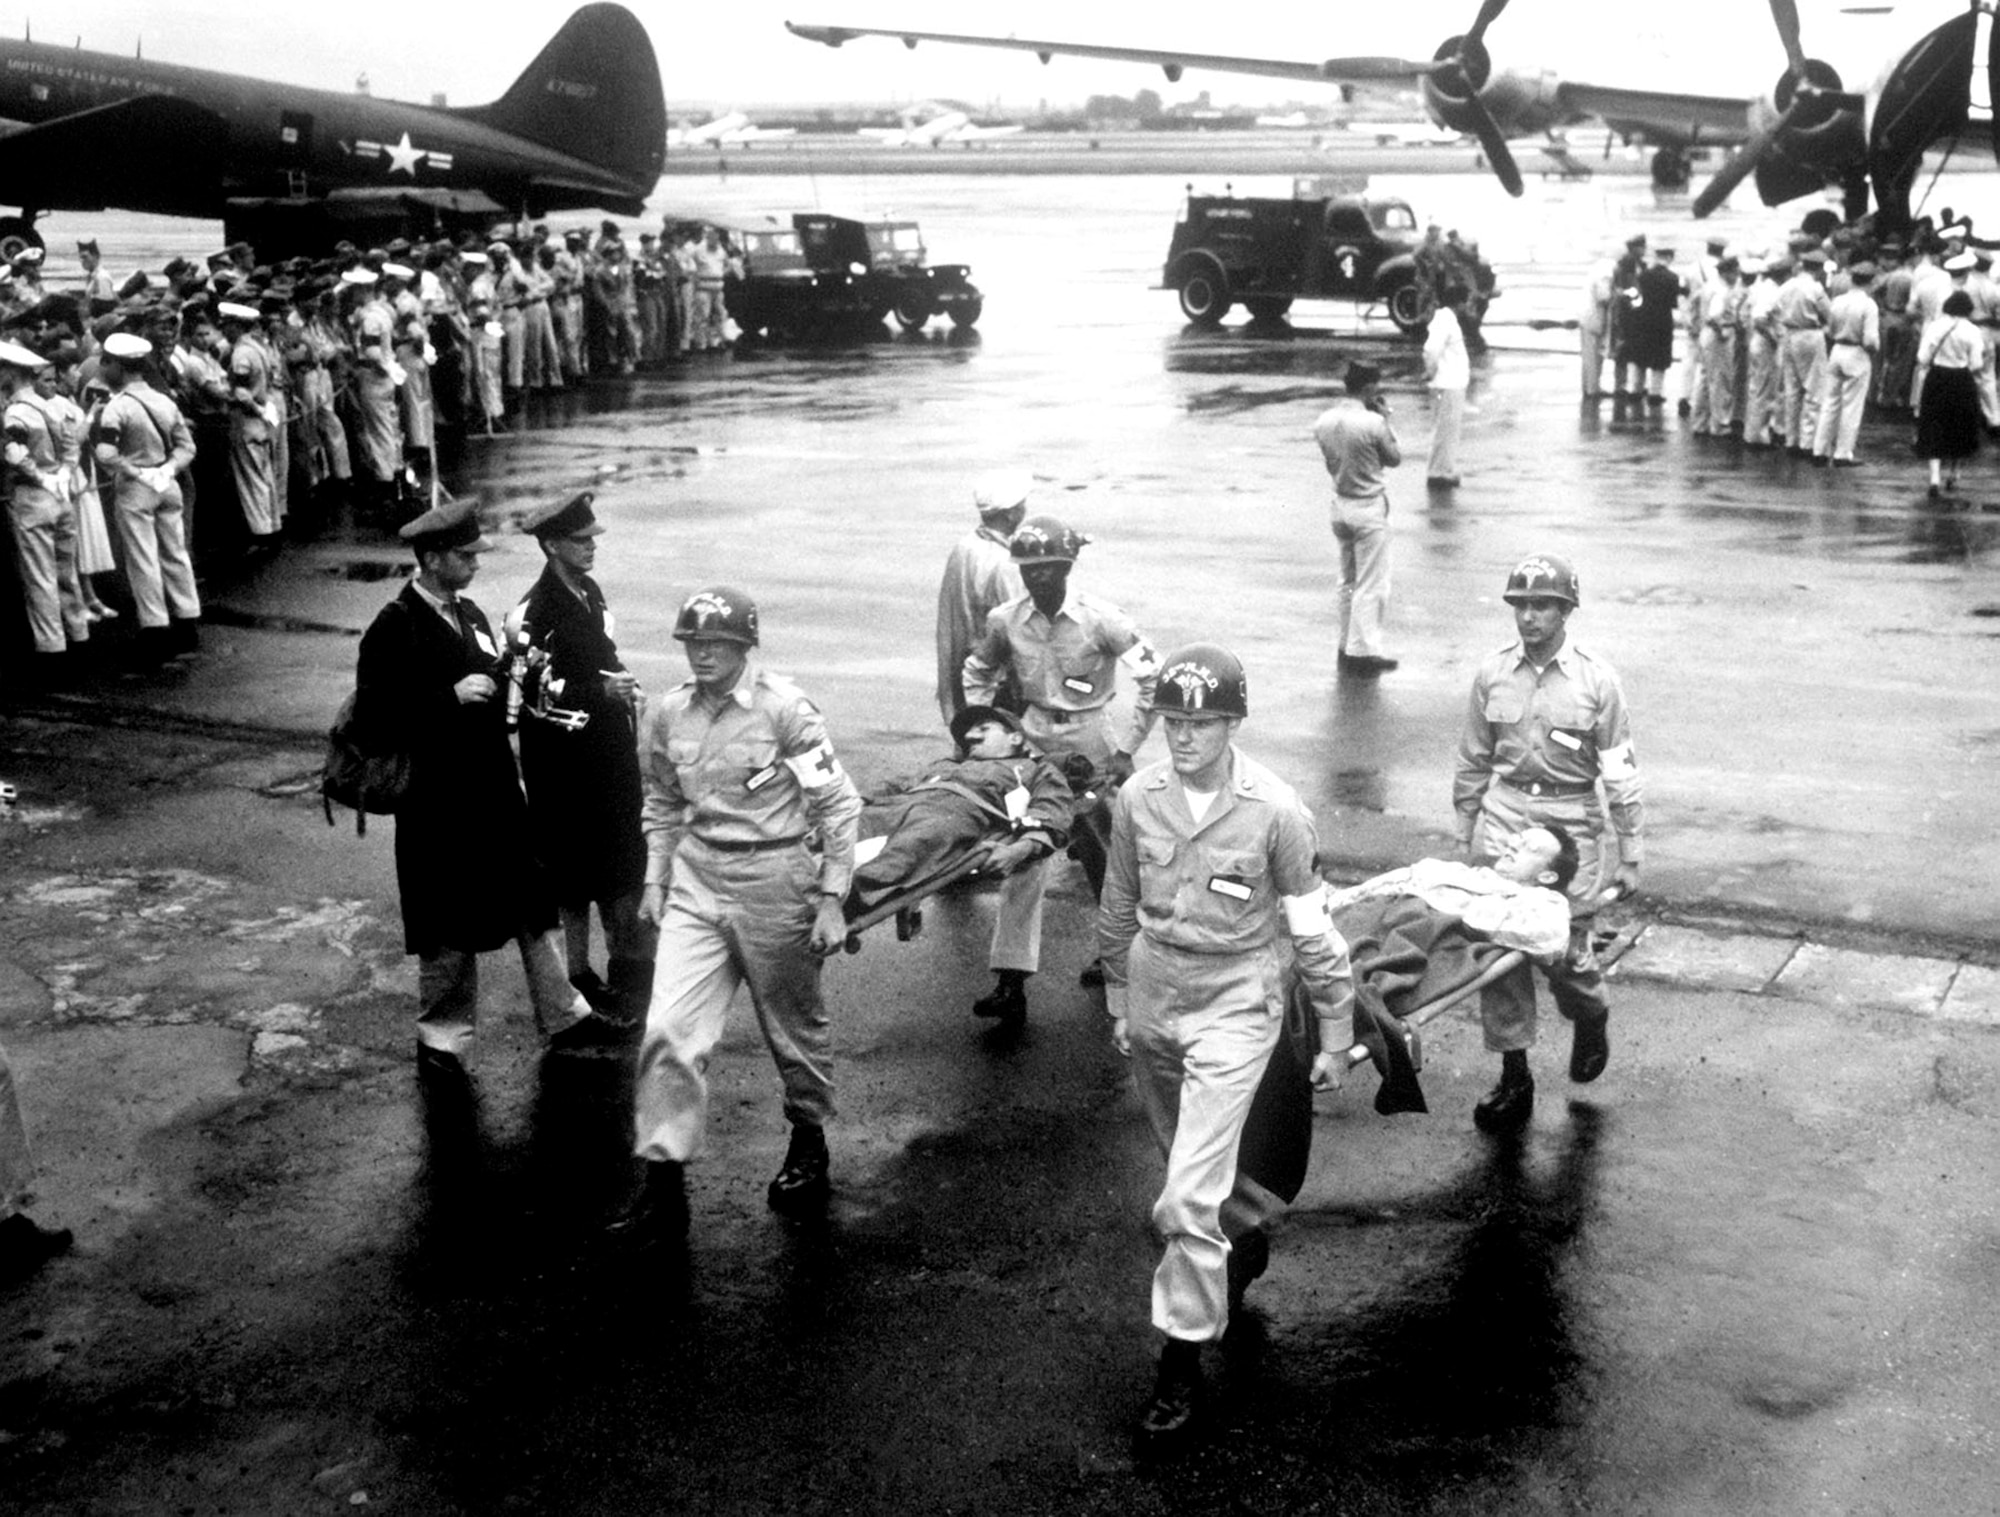 Many POWs required immediate medical care upon release. These exchanged prisoners are arriving at Tachikawa Air Base, Japan, in August 1953. (U.S. Air Force photo)